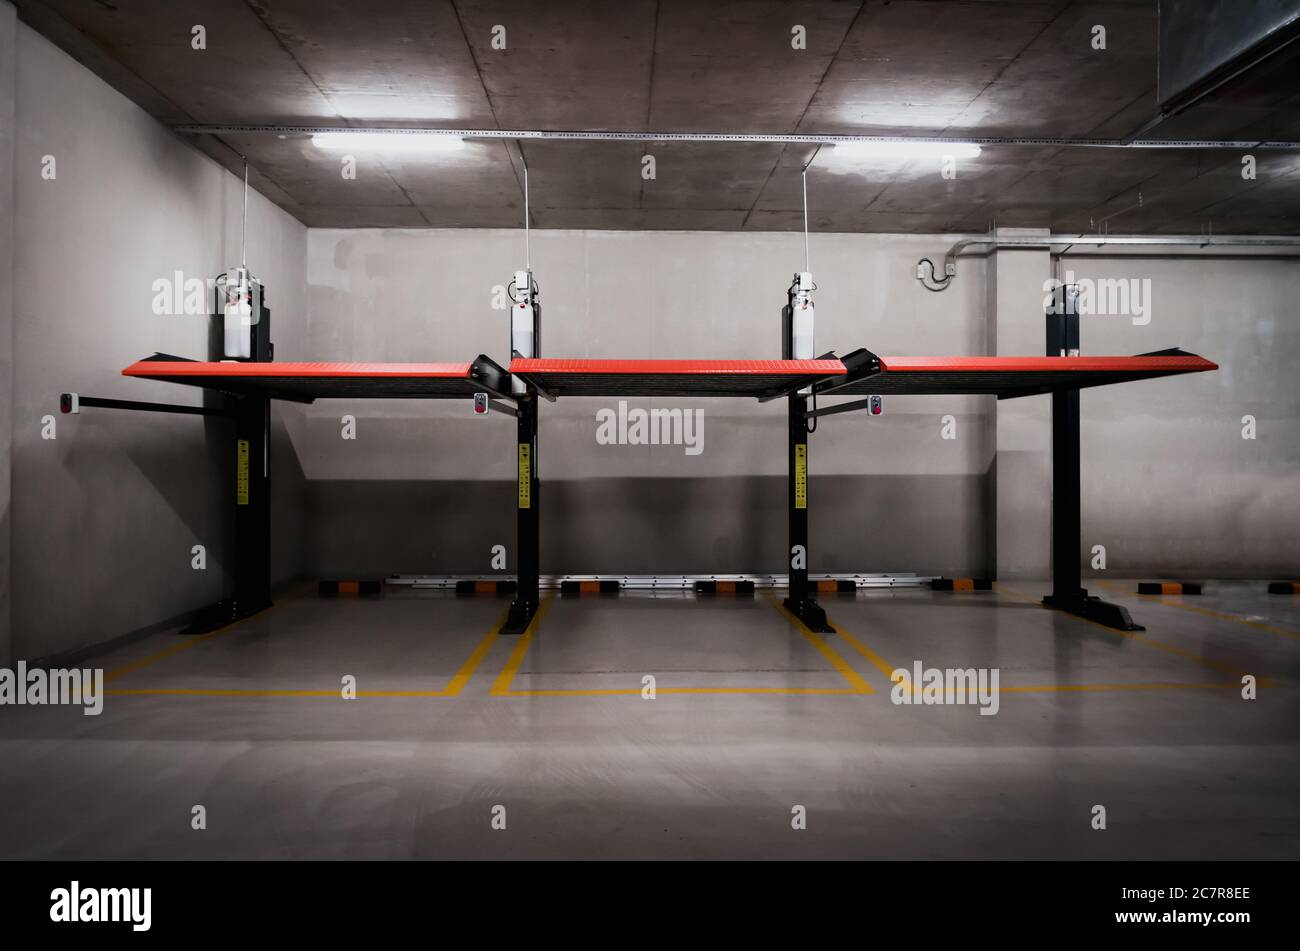 Elevated car parking equipment at office building basement. Car parking space. Stock Photo